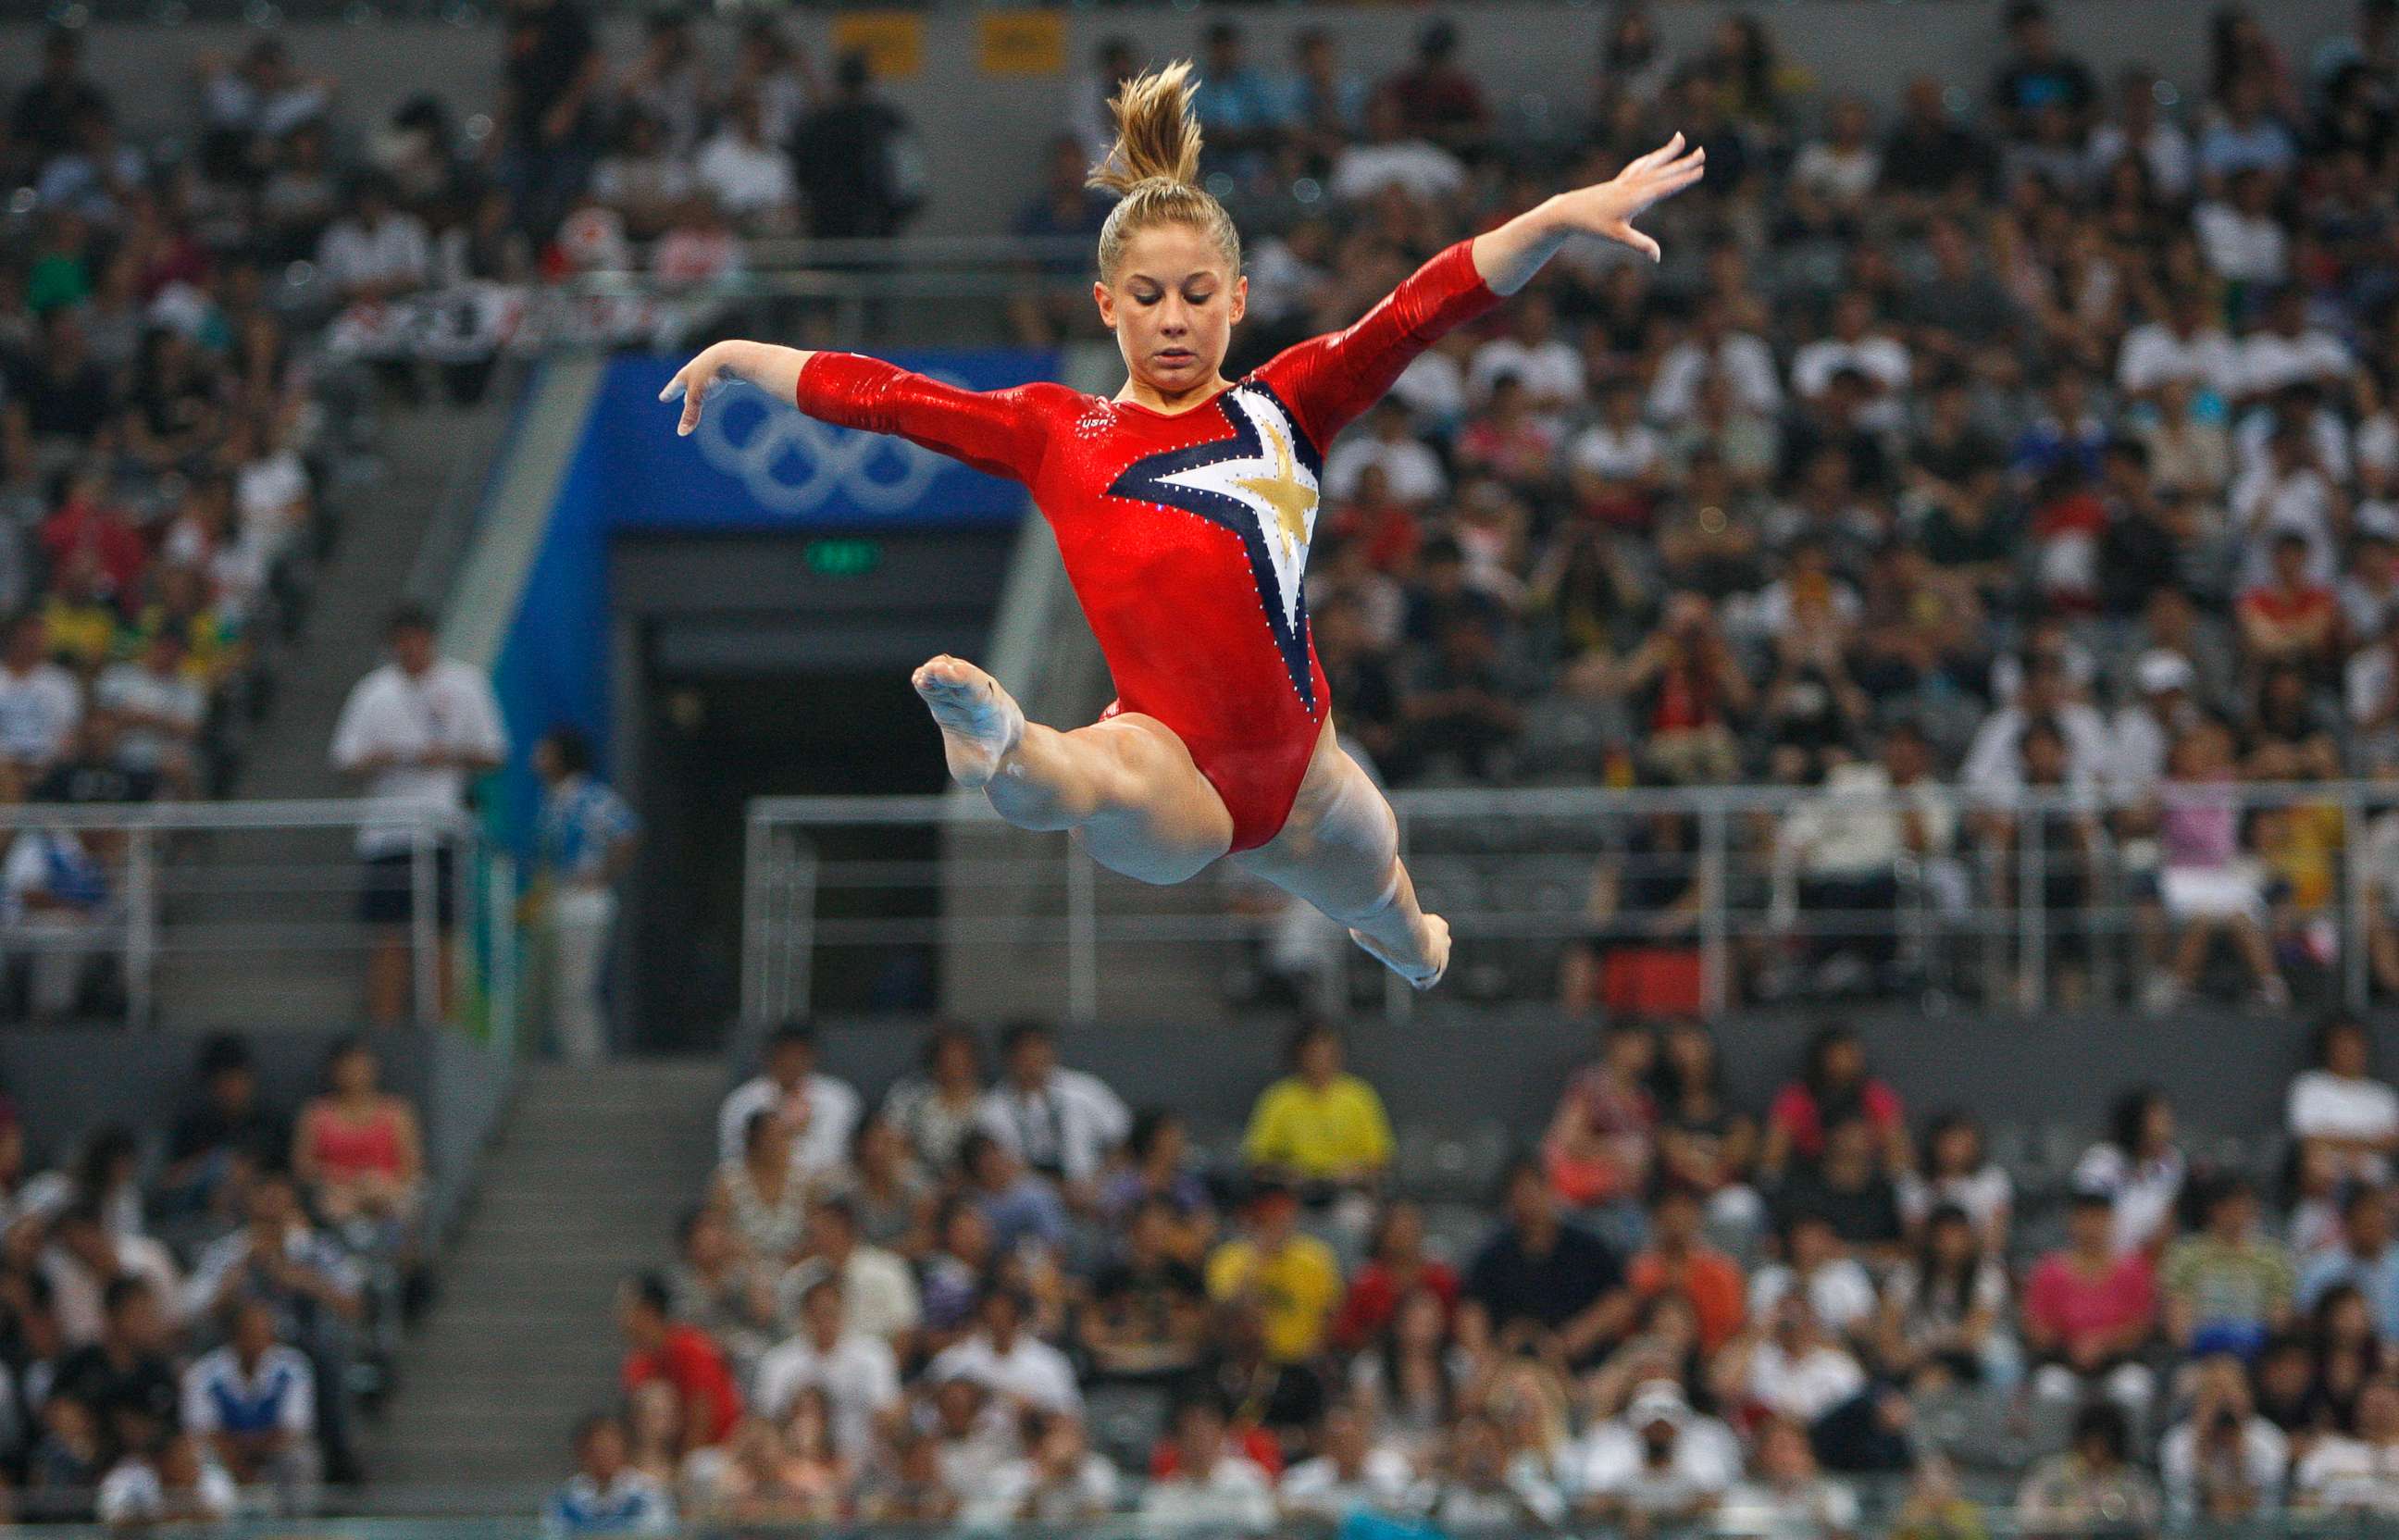 PHOTO: Shawn Johnson of the United States performs on the balance beam during qualification for the women's artistic gymnastics event held at the National Indoor Stadium during Day 2 of the 2008 Summer Olympic Games, Aug. 10, 2008 in Beijing.